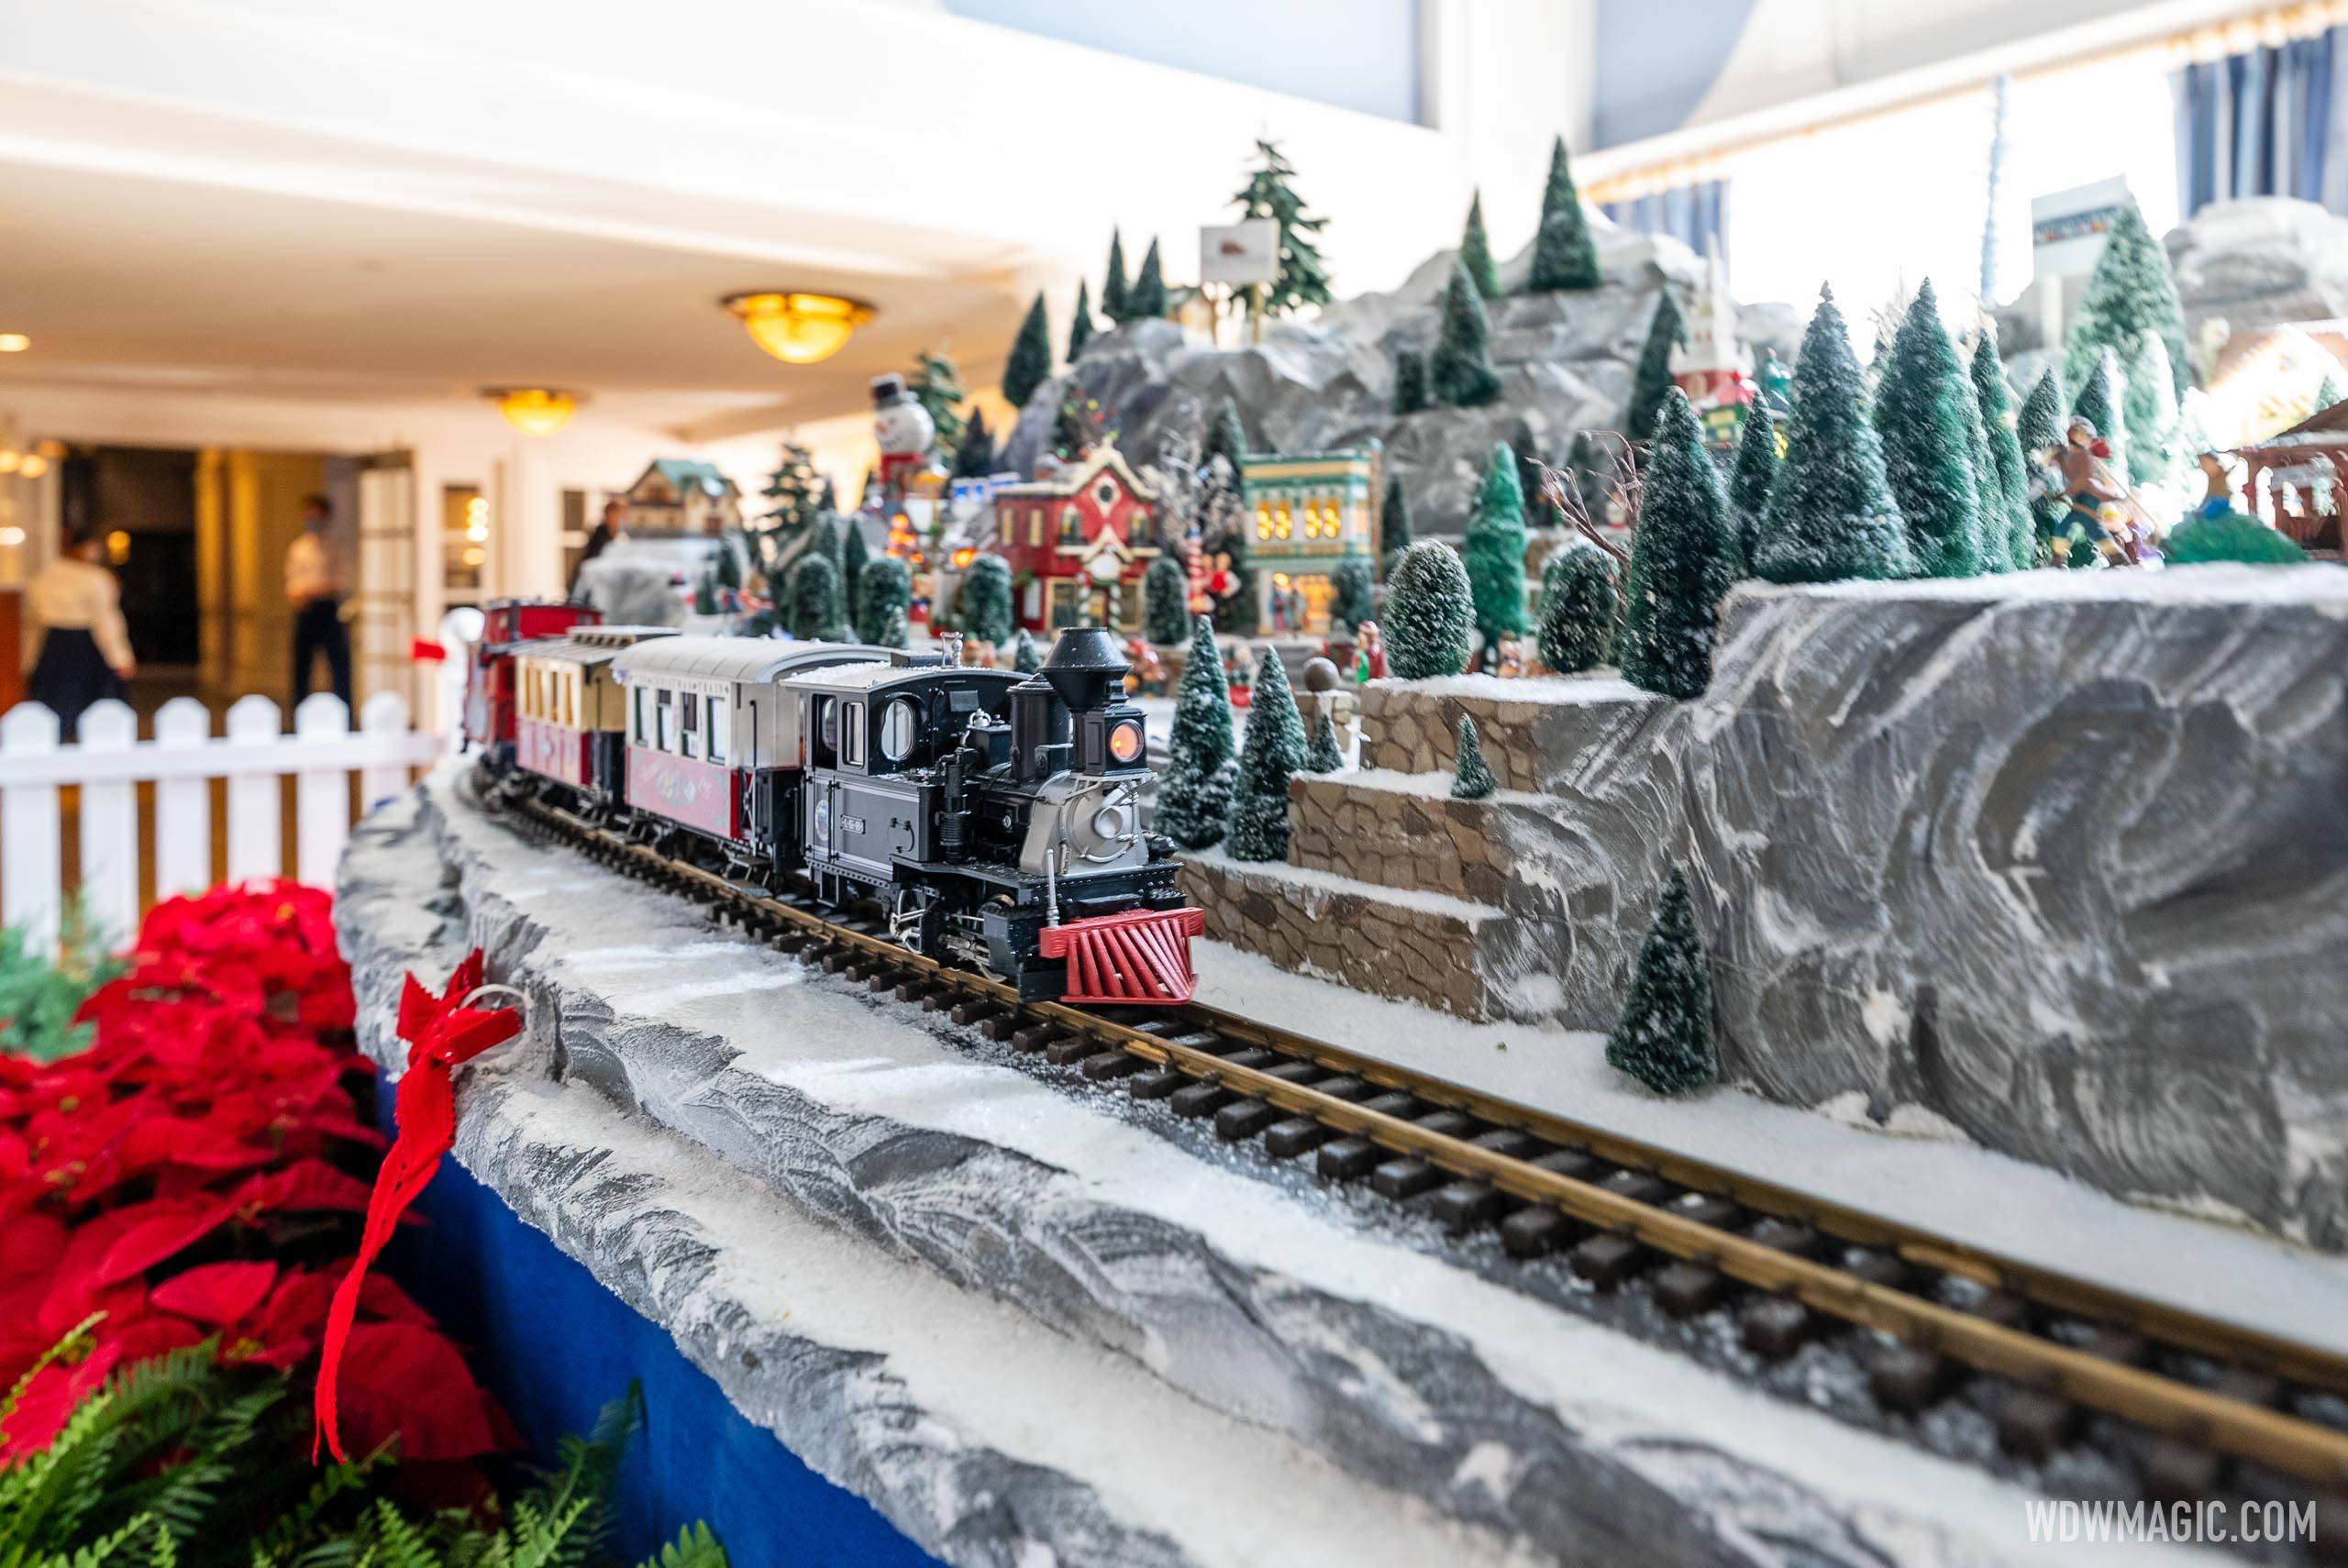 The model Christmas village includes a working train and ski lift